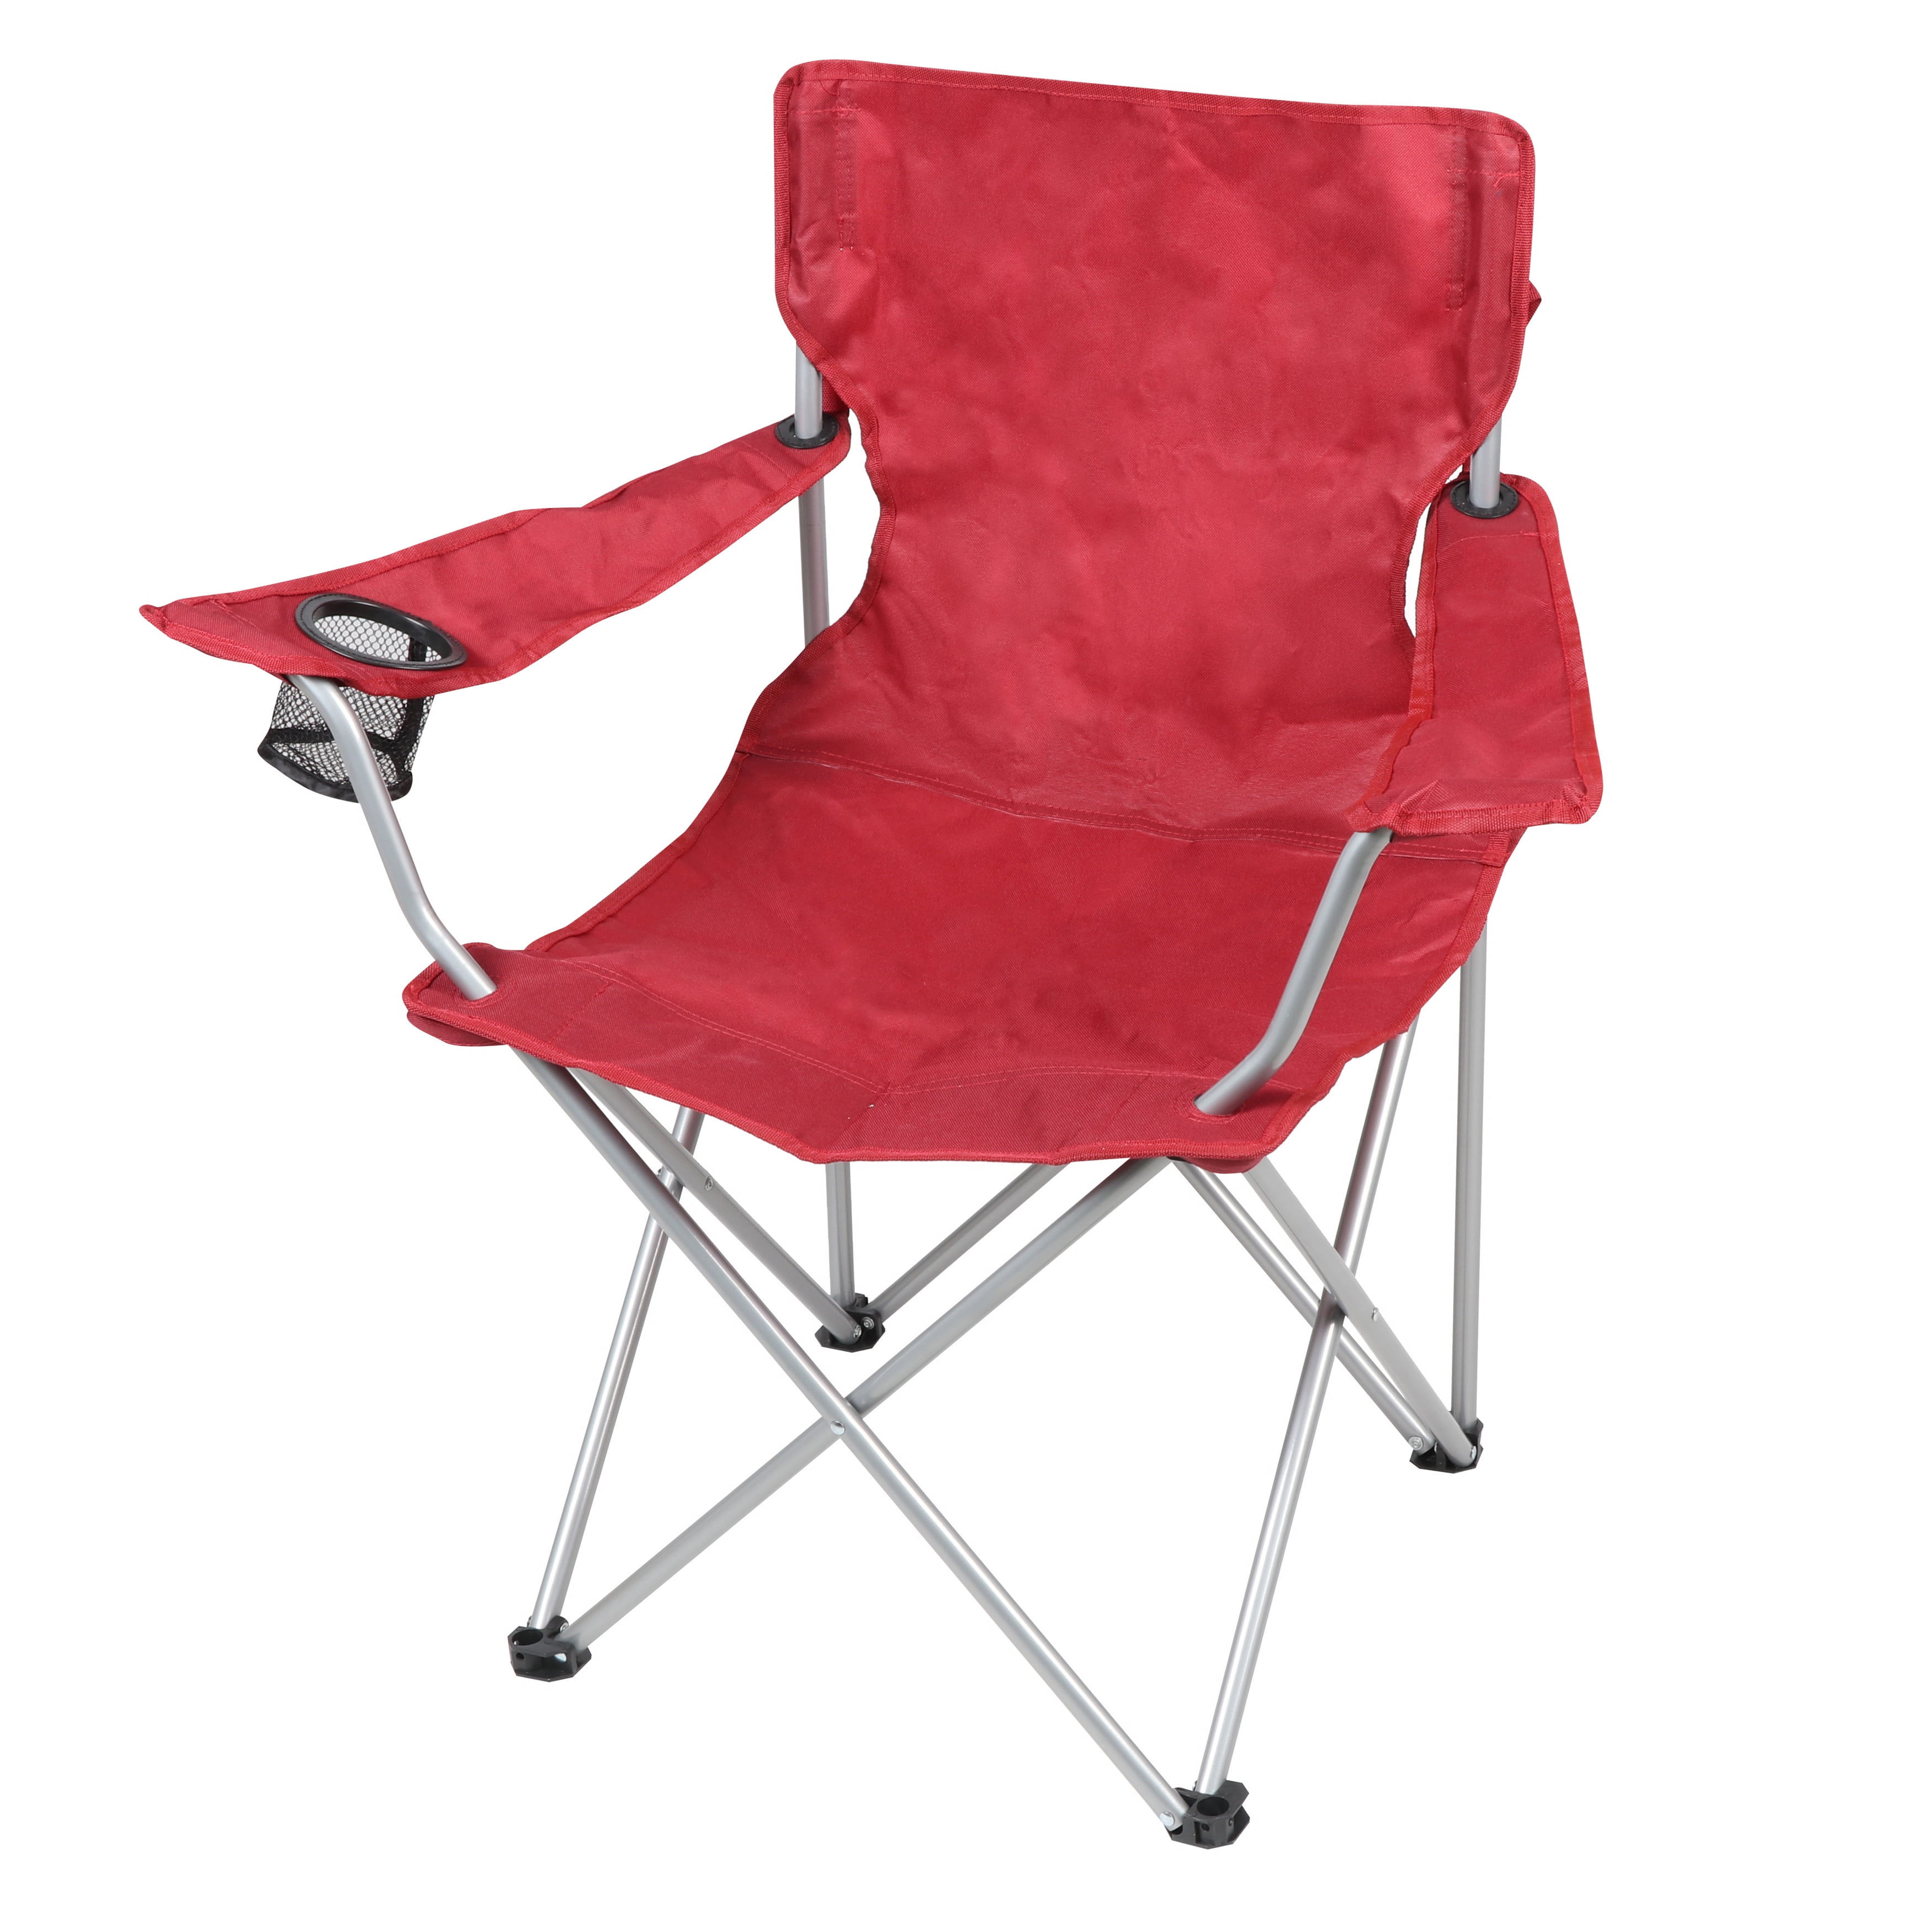 Camp Chairs Set Of 4 Classic Folding Built-in Cup Holders Carrying Bags 